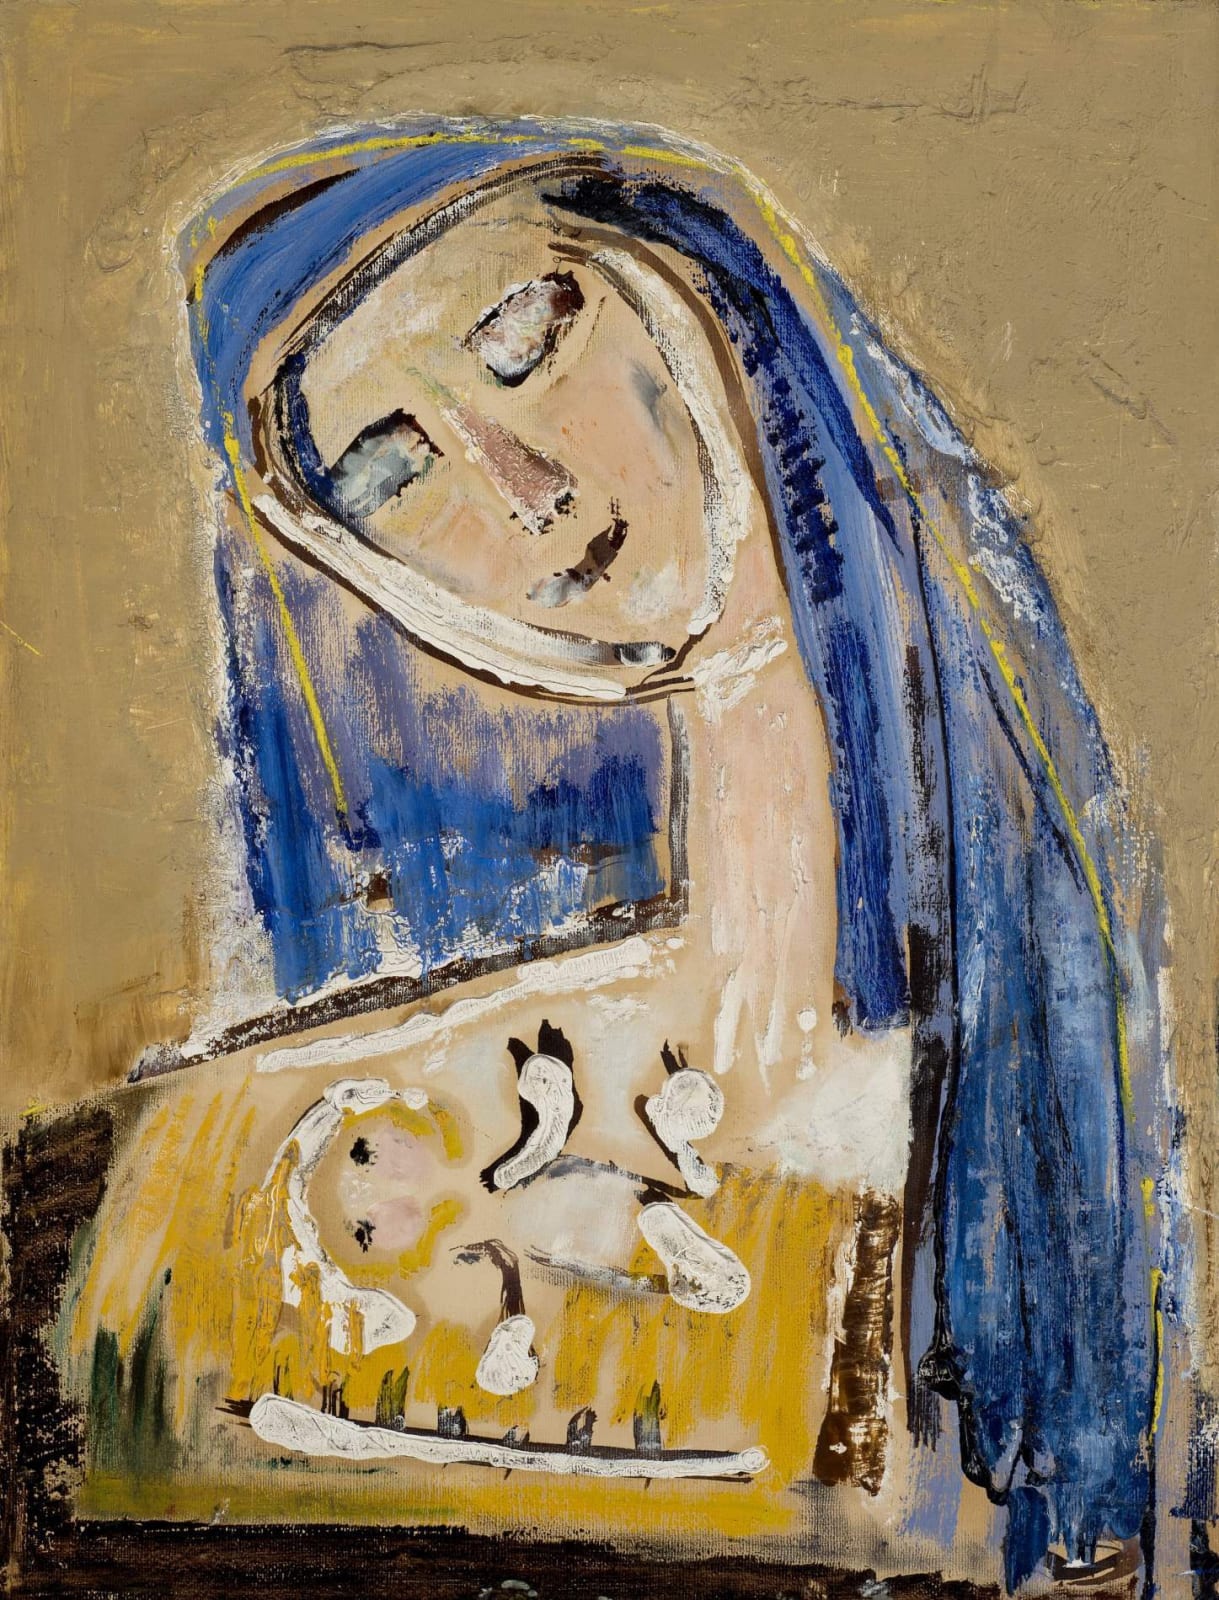 Karolina Borchardt (1905-1995) Madonna 1970 Oil on paper on board 76 x 56.5 cm POSK Art Collection To see and disocver more about this artist click here